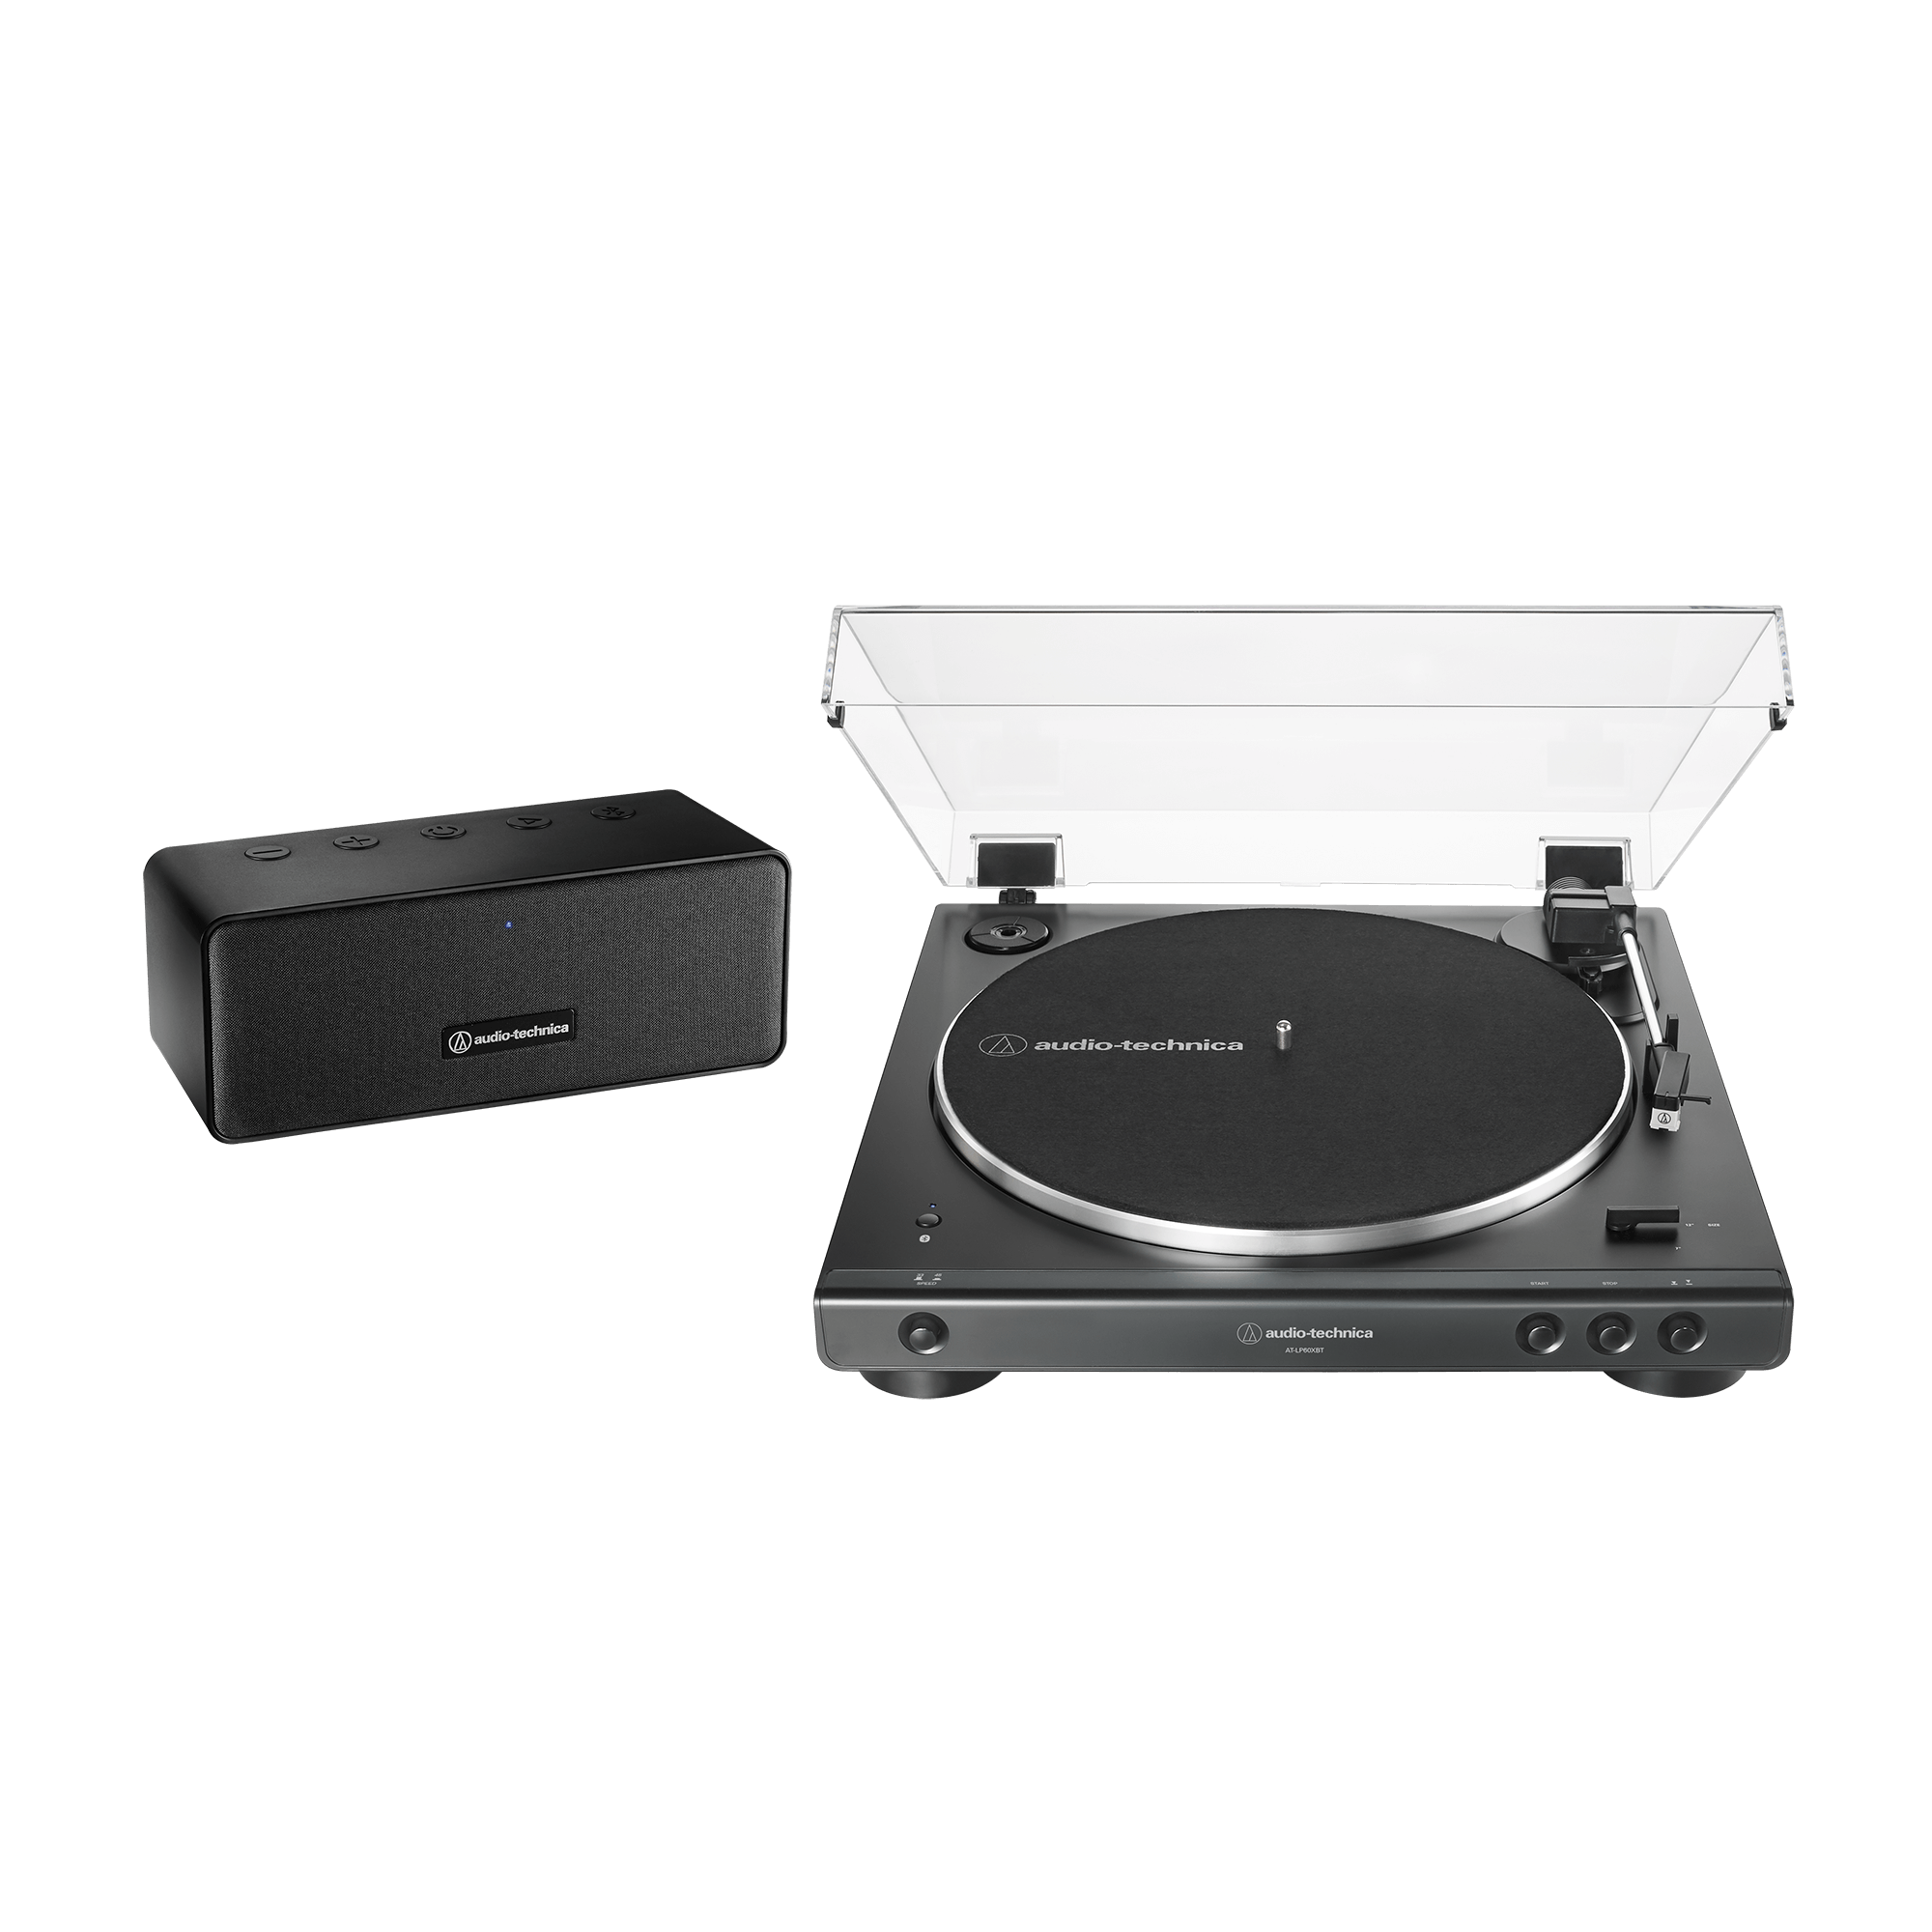 best speakers for turntable